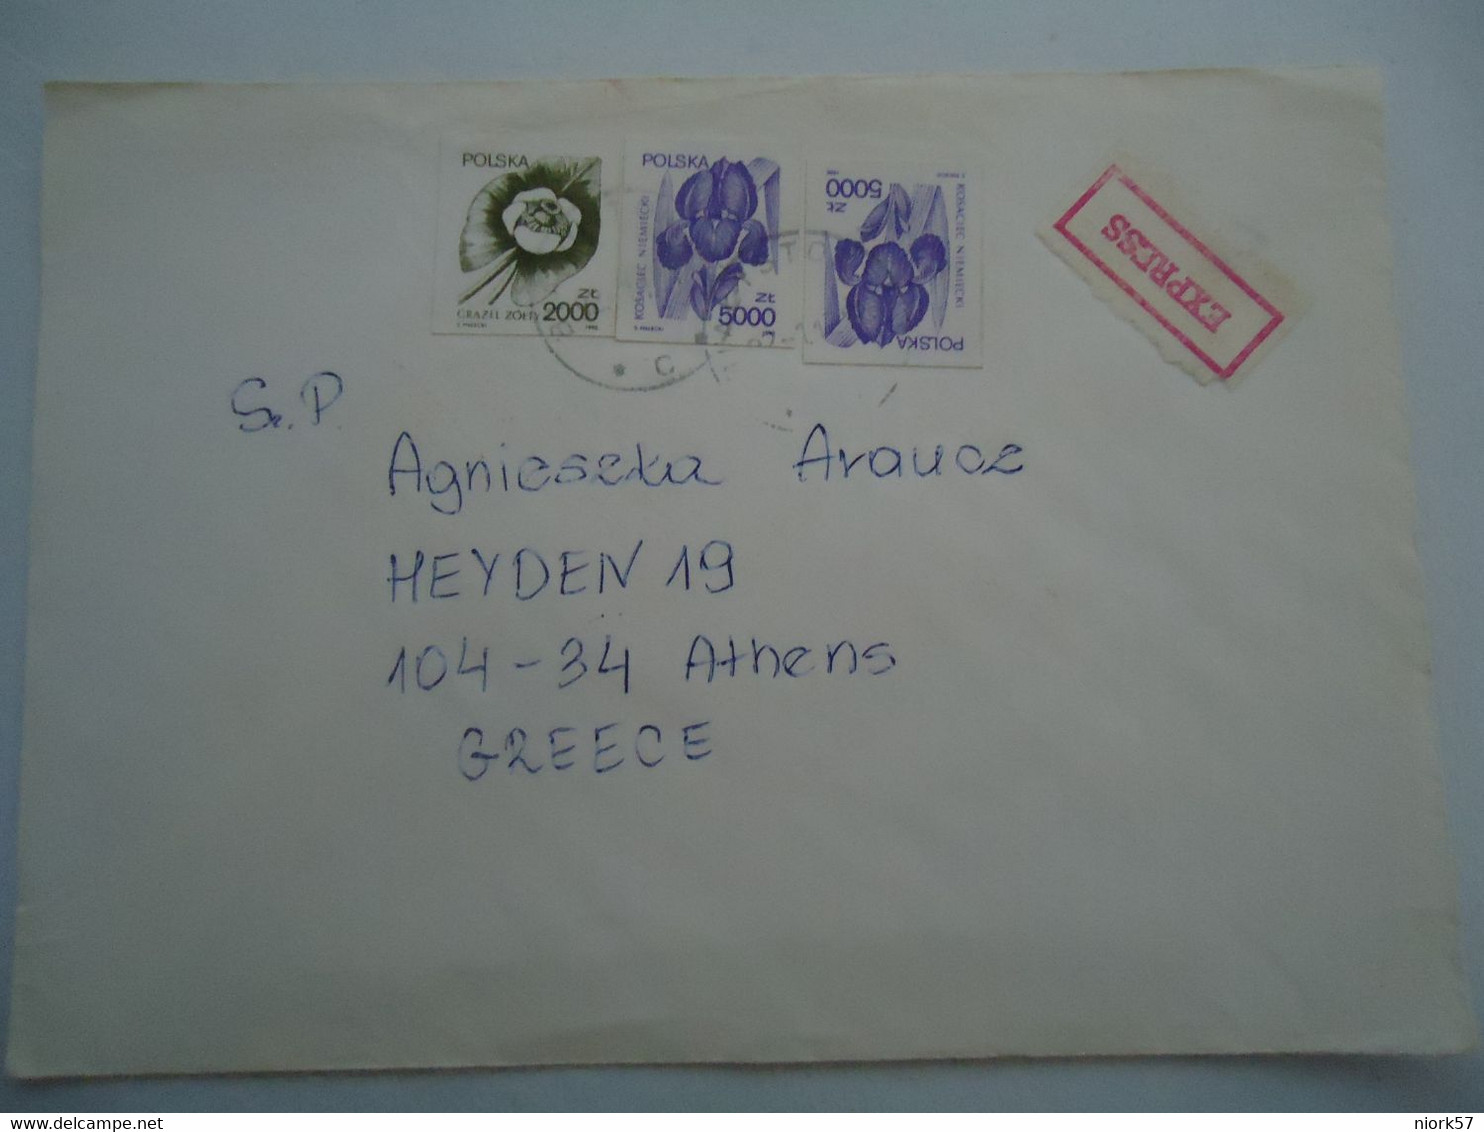 GREECE  POLAND   EXPESS COVER  FLOWERS  USED   POSTMARK  BIAKYSTOA   AND EXPRES ATHENS - Affrancature E Annulli Meccanici (pubblicitari)